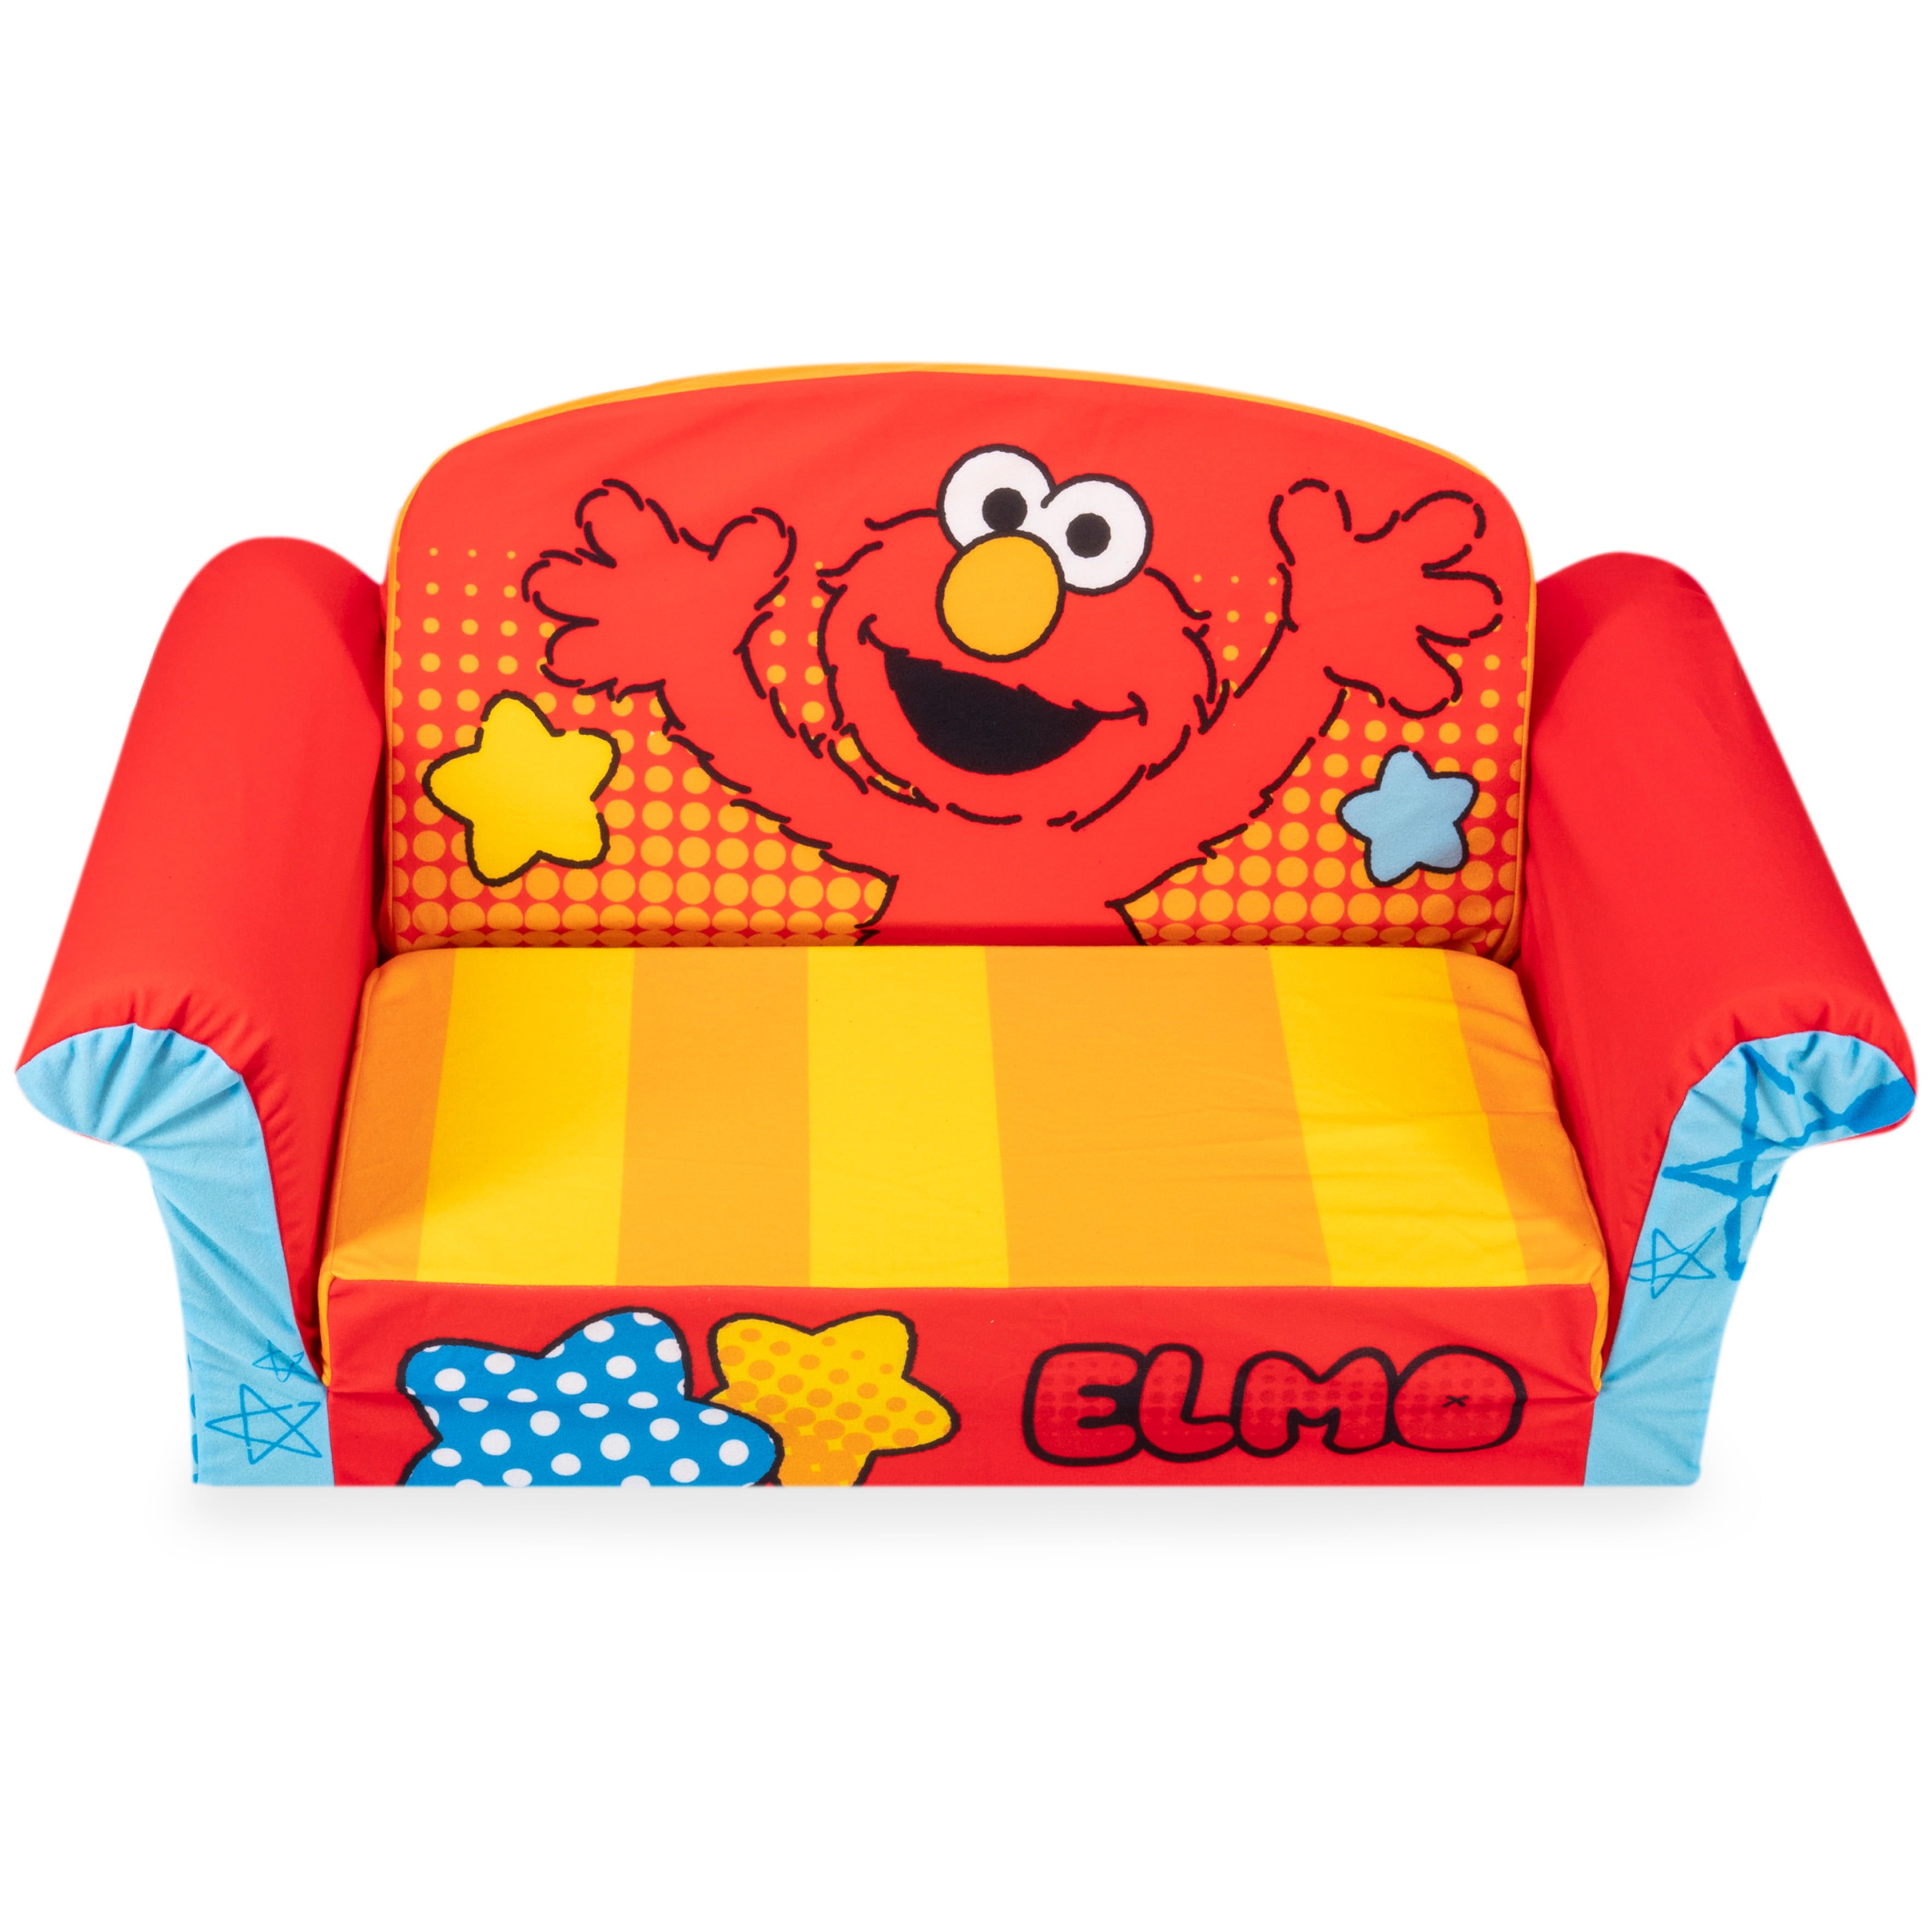 Paw Foam High Chair Sofa Kids Furniture For Boys Girls Bedroom Playroom Couch US 